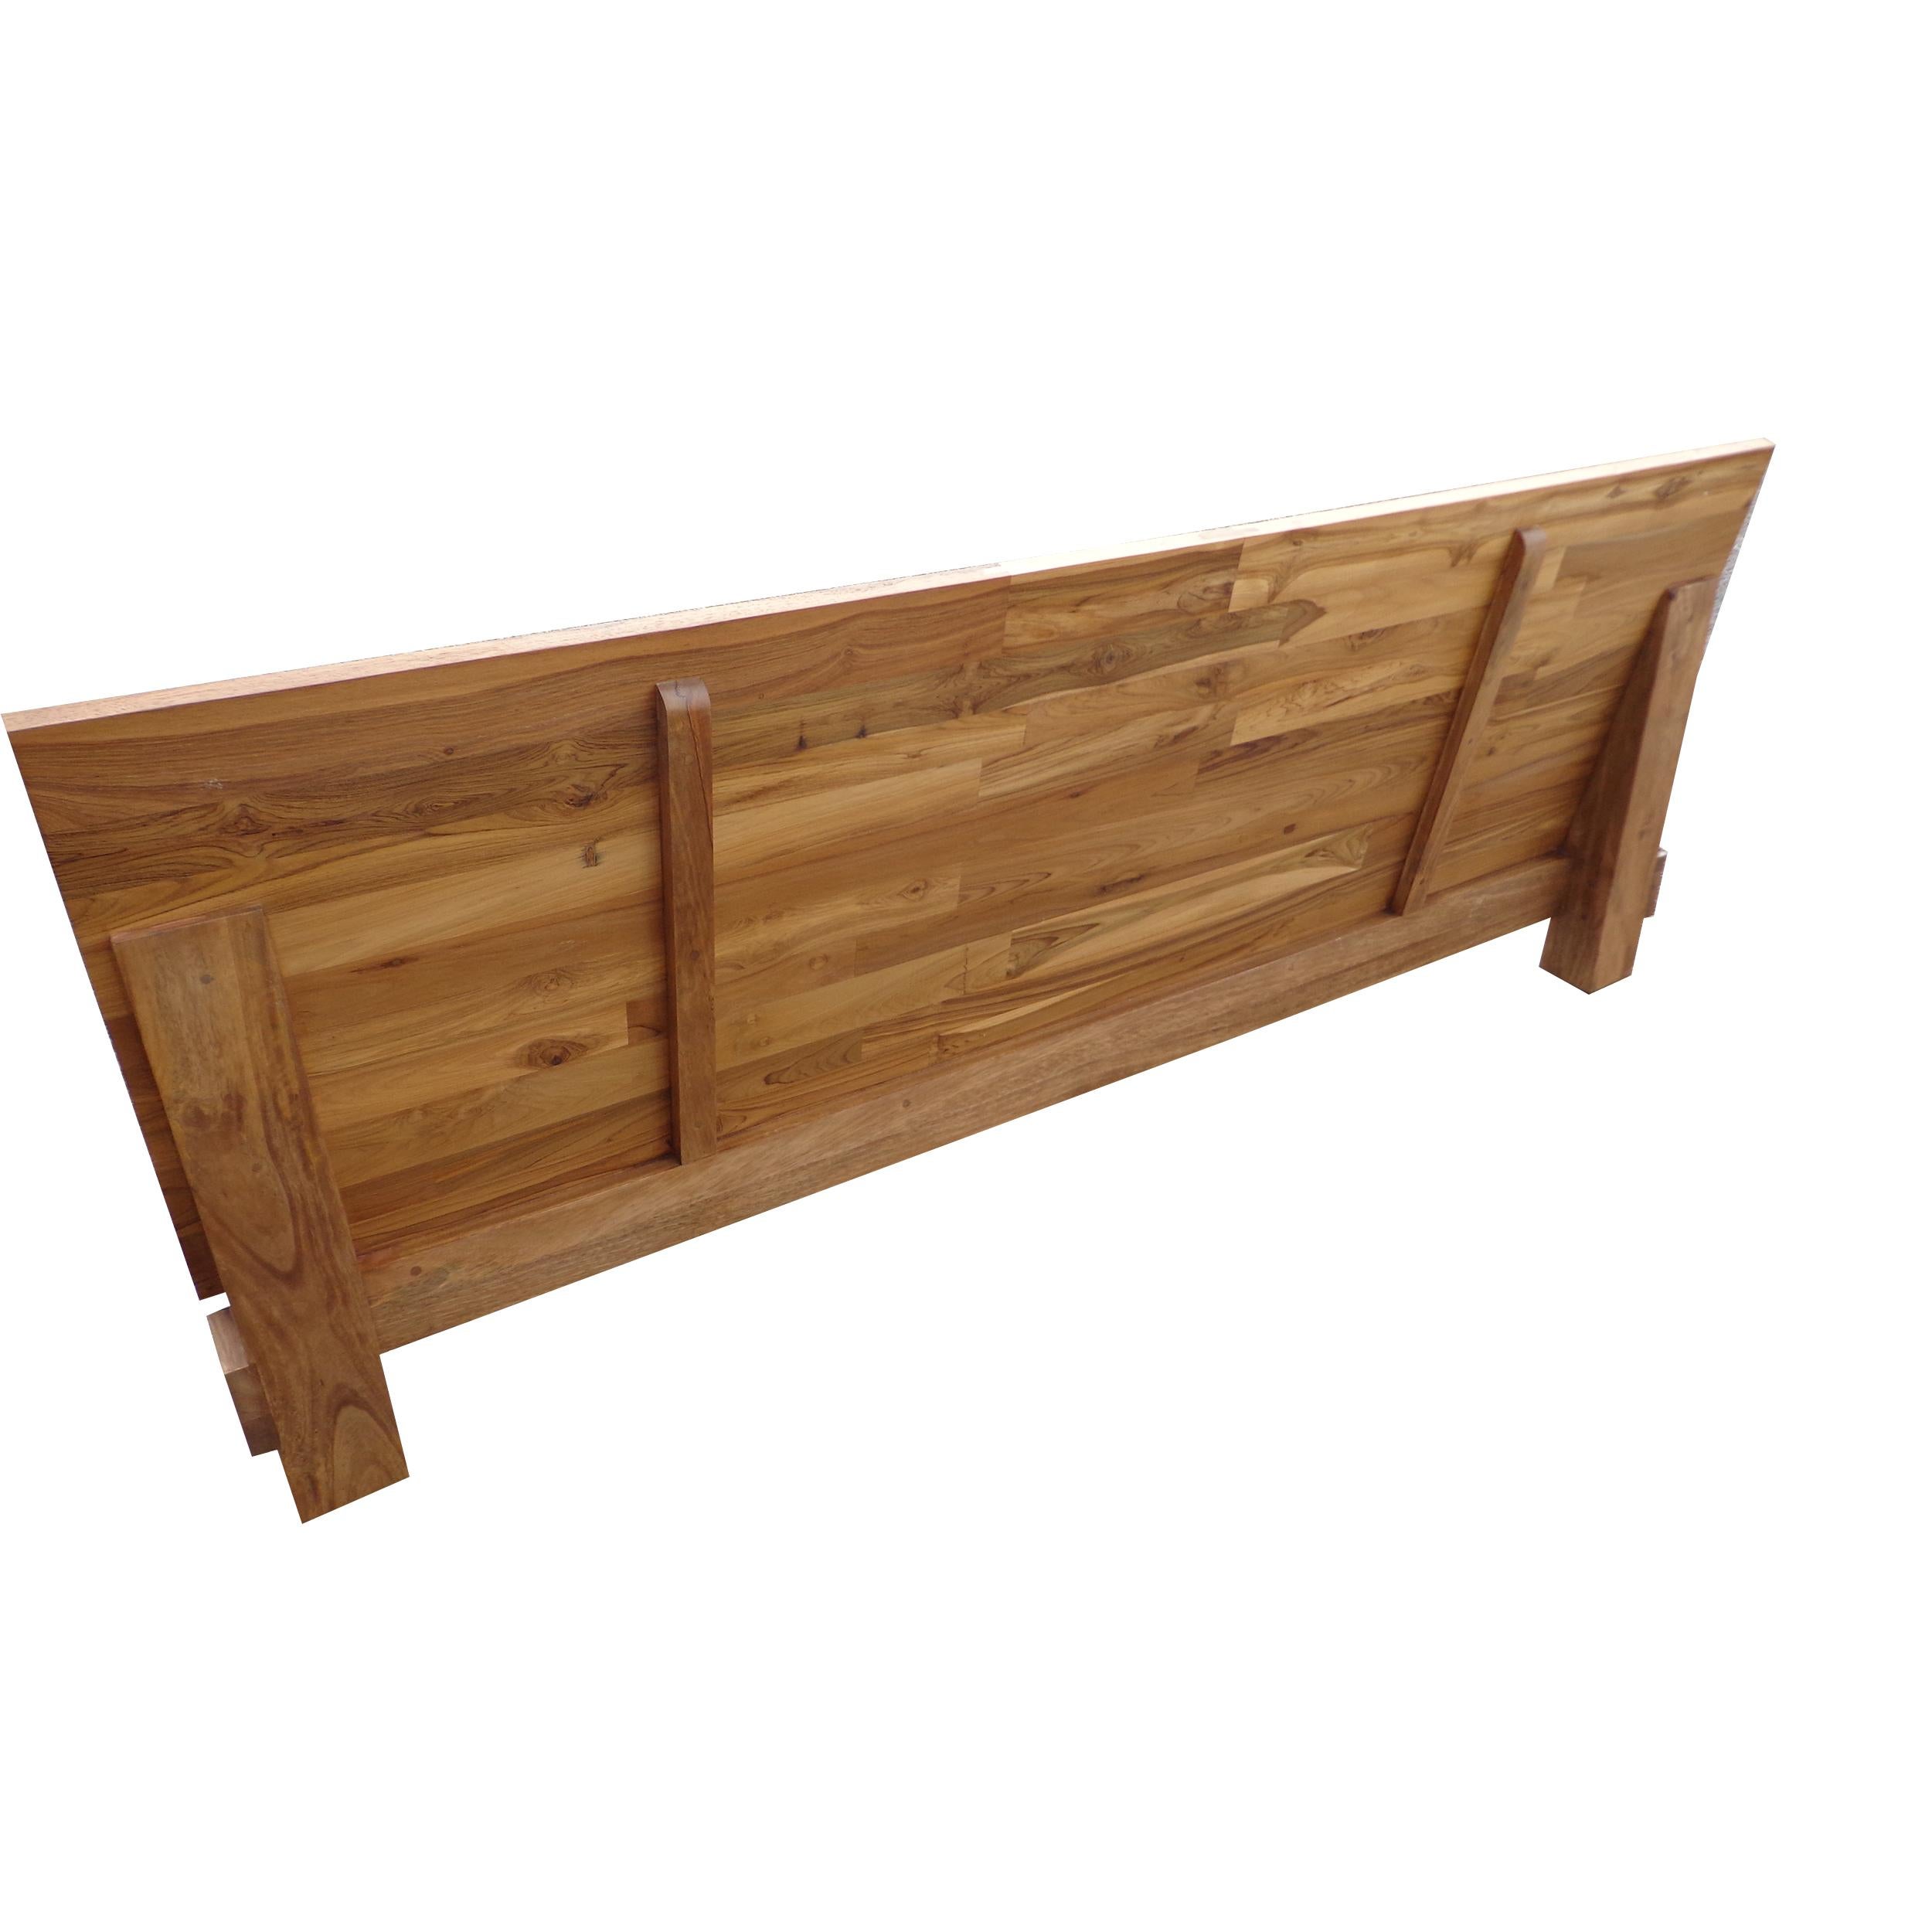 Rustic style headboard

Charming headboard assembled with reclaimed hard wood planks. Measures 79